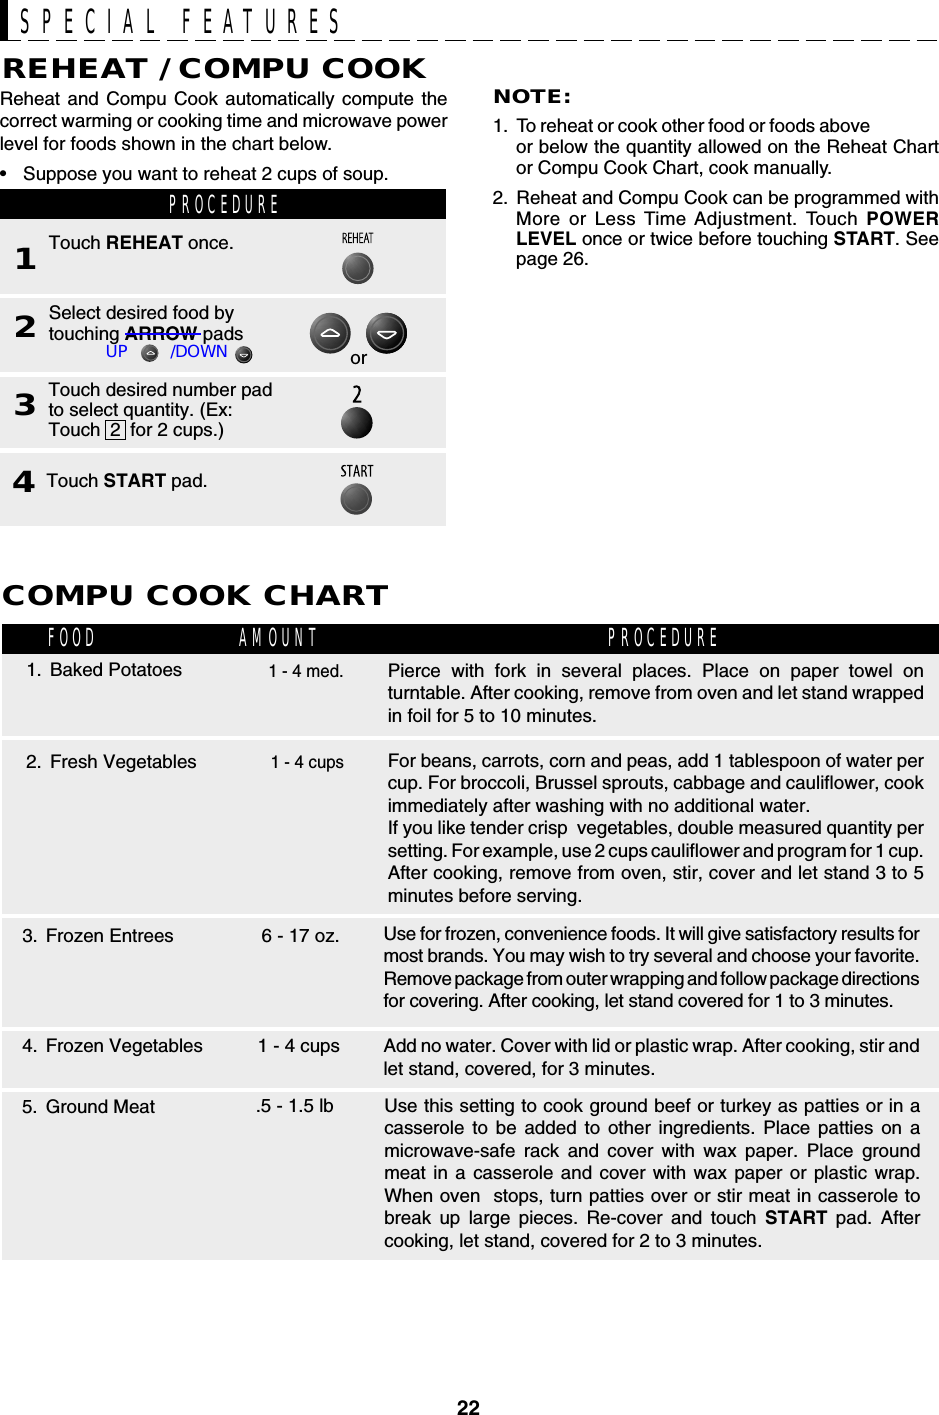 22SPECIAL FEATURESReheat and Compu Cook automatically compute thecorrect warming or cooking time and microwave powerlevel for foods shown in the chart below.•Suppose you want to reheat 2 cups of soup.REHEAT / COMPU COOKPROCEDURE1Select desired food bytouching ARROW pads2Touch REHEAT once.Touch desired number padto select quantity. (Ex:Touch  2  for 2 cups.)3NOTE:1. To reheat or cook other food or foods aboveor below the quantity allowed on the Reheat Chartor Compu Cook Chart, cook manually.2. Reheat and Compu Cook can be programmed withMore or Less Time Adjustment. Touch POWERLEVEL once or twice before touching START. Seepage 26.Touch START pad.4COMPU COOK CHART2. Fresh VegetablesPierce with fork in several places. Place on paper towel onturntable. After cooking, remove from oven and let stand wrappedin foil for 5 to 10 minutes.For beans, carrots, corn and peas, add 1 tablespoon of water percup. For broccoli, Brussel sprouts, cabbage and cauliflower, cookimmediately after washing with no additional water.If you like tender crisp  vegetables, double measured quantity persetting. For example, use 2 cups cauliflower and program for 1 cup.After cooking, remove from oven, stir, cover and let stand 3 to 5minutes before serving.1 - 4 med.1. Baked PotatoesFOOD PROCEDUREAMOUNT1 - 4 cupsUse this setting to cook ground beef or turkey as patties or in acasserole to be added to other ingredients. Place patties on amicrowave-safe rack and cover with wax paper. Place groundmeat in a casserole and cover with wax paper or plastic wrap.When oven  stops, turn patties over or stir meat in casserole tobreak up large pieces. Re-cover and touch START pad. Aftercooking, let stand, covered for 2 to 3 minutes.5. Ground Meat .5 - 1.5 lb4. Frozen Vegetables3. Frozen Entrees 6 - 17 oz.1 - 4 cupsUse for frozen, convenience foods. It will give satisfactory results formost brands. You may wish to try several and choose your favorite.Remove package from outer wrapping and follow package directionsfor covering. After cooking, let stand covered for 1 to 3 minutes.Add no water. Cover with lid or plastic wrap. After cooking, stir andlet stand, covered, for 3 minutes.orUP         /DOWN